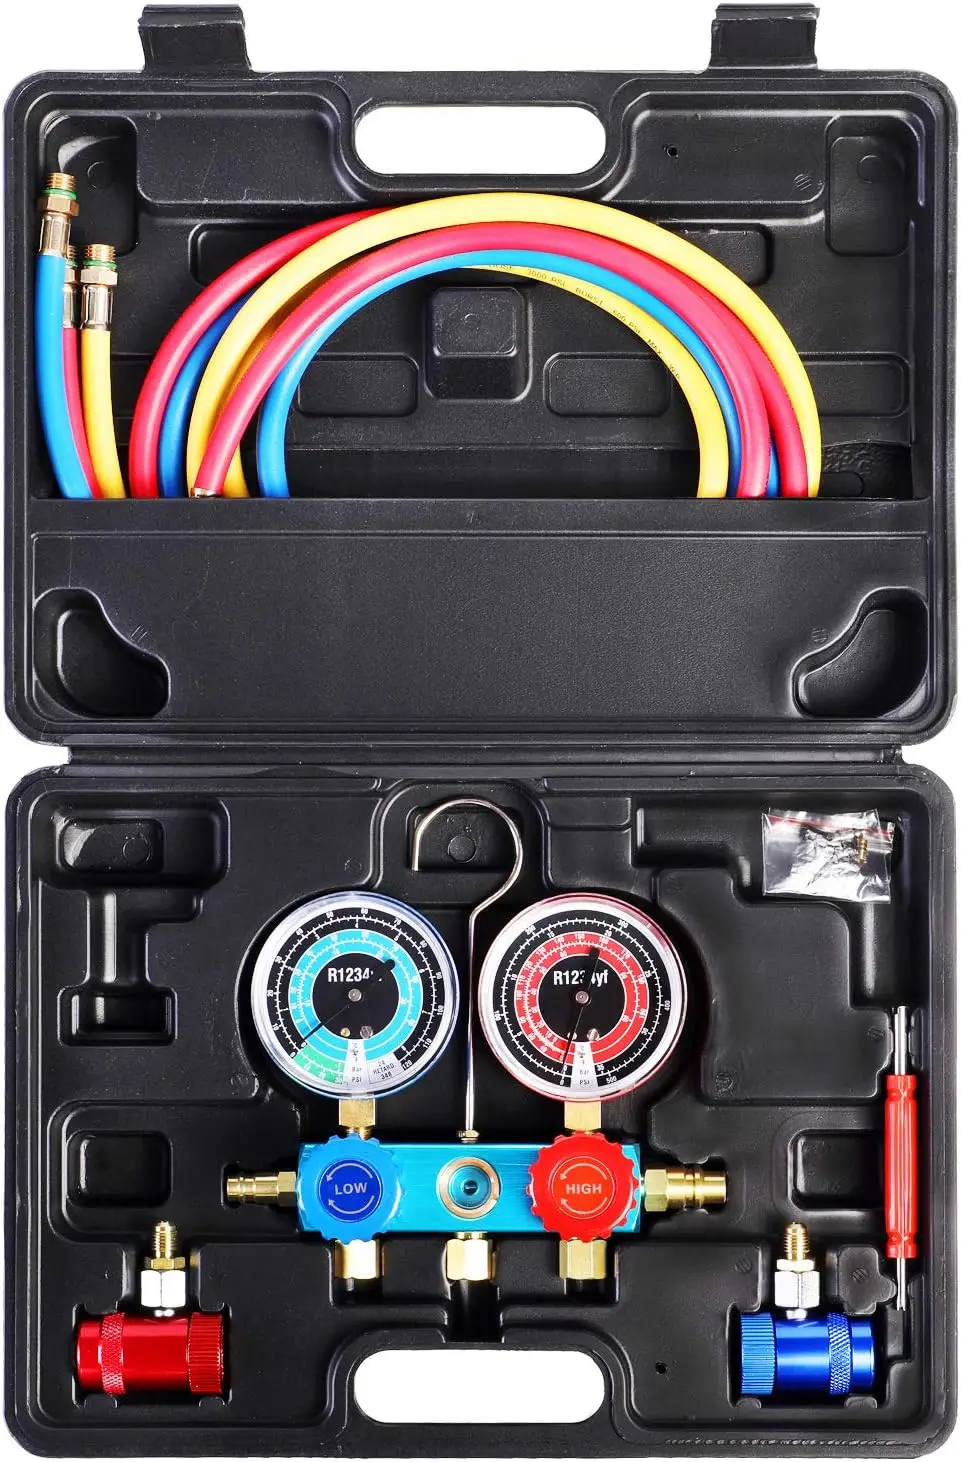 

Way AC Manifold Diagnostic Gauge Air Conditioner R1234yf Refrigerant Charging Set with 5FT Hose Quick Couplers Valve Tool Kit